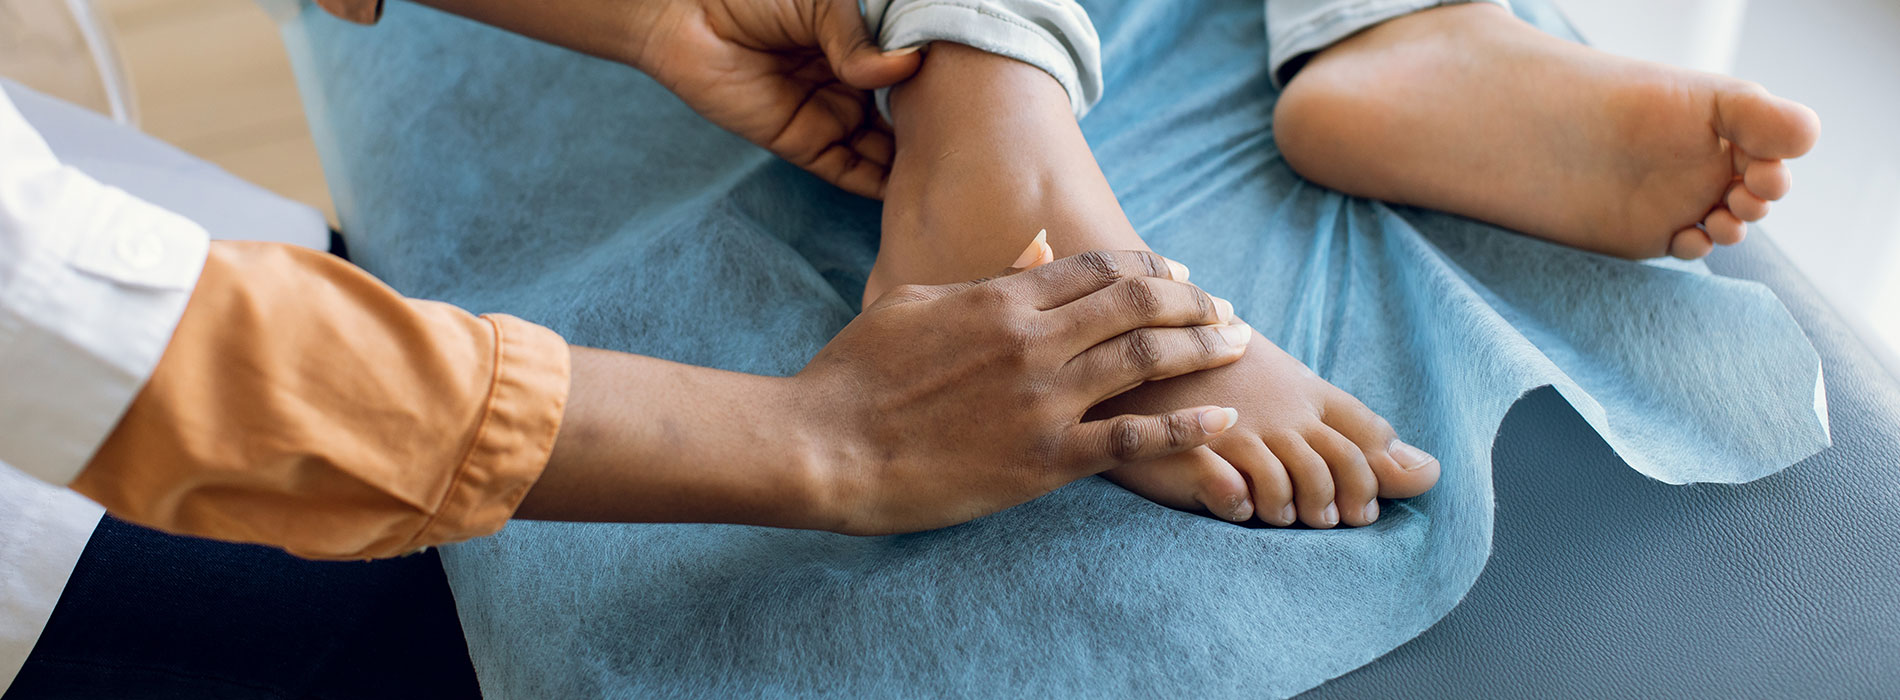 Premiere Pointe Podiatry | Sports Medicine, Flat Feet and Ingrown Nails